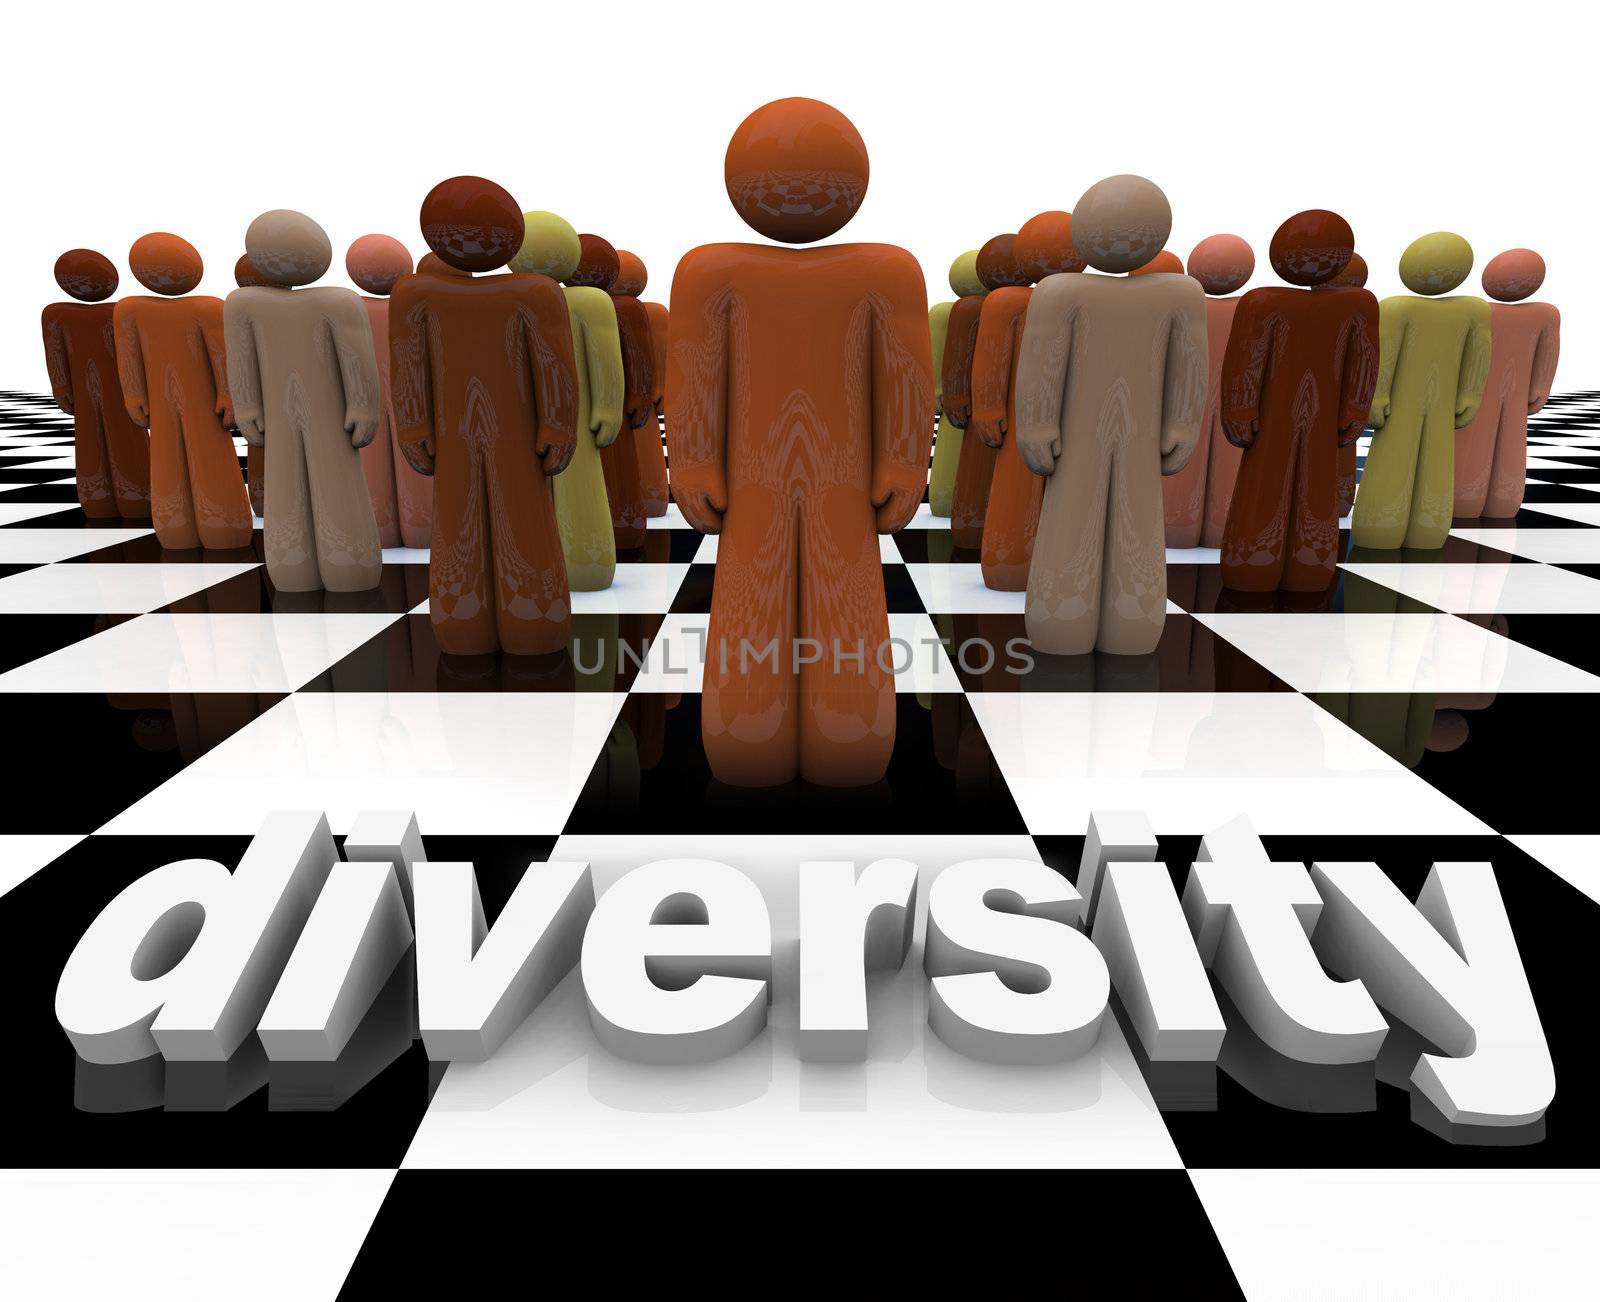 The word Diversity on a chessboard with a line-up of many people of different races.